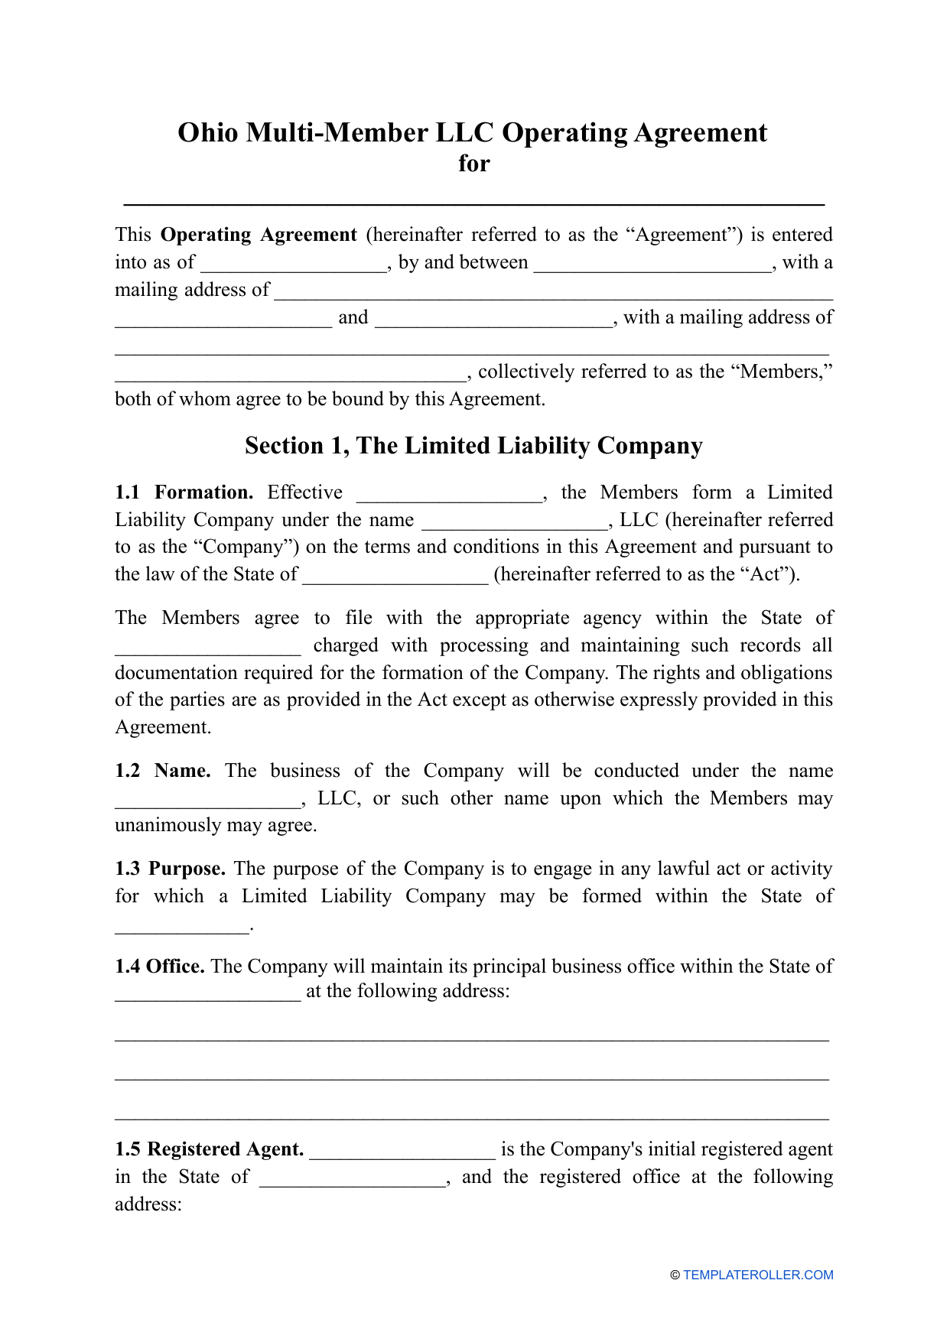 Multi-Member LLC Operating Agreement Template - Ohio, Page 1